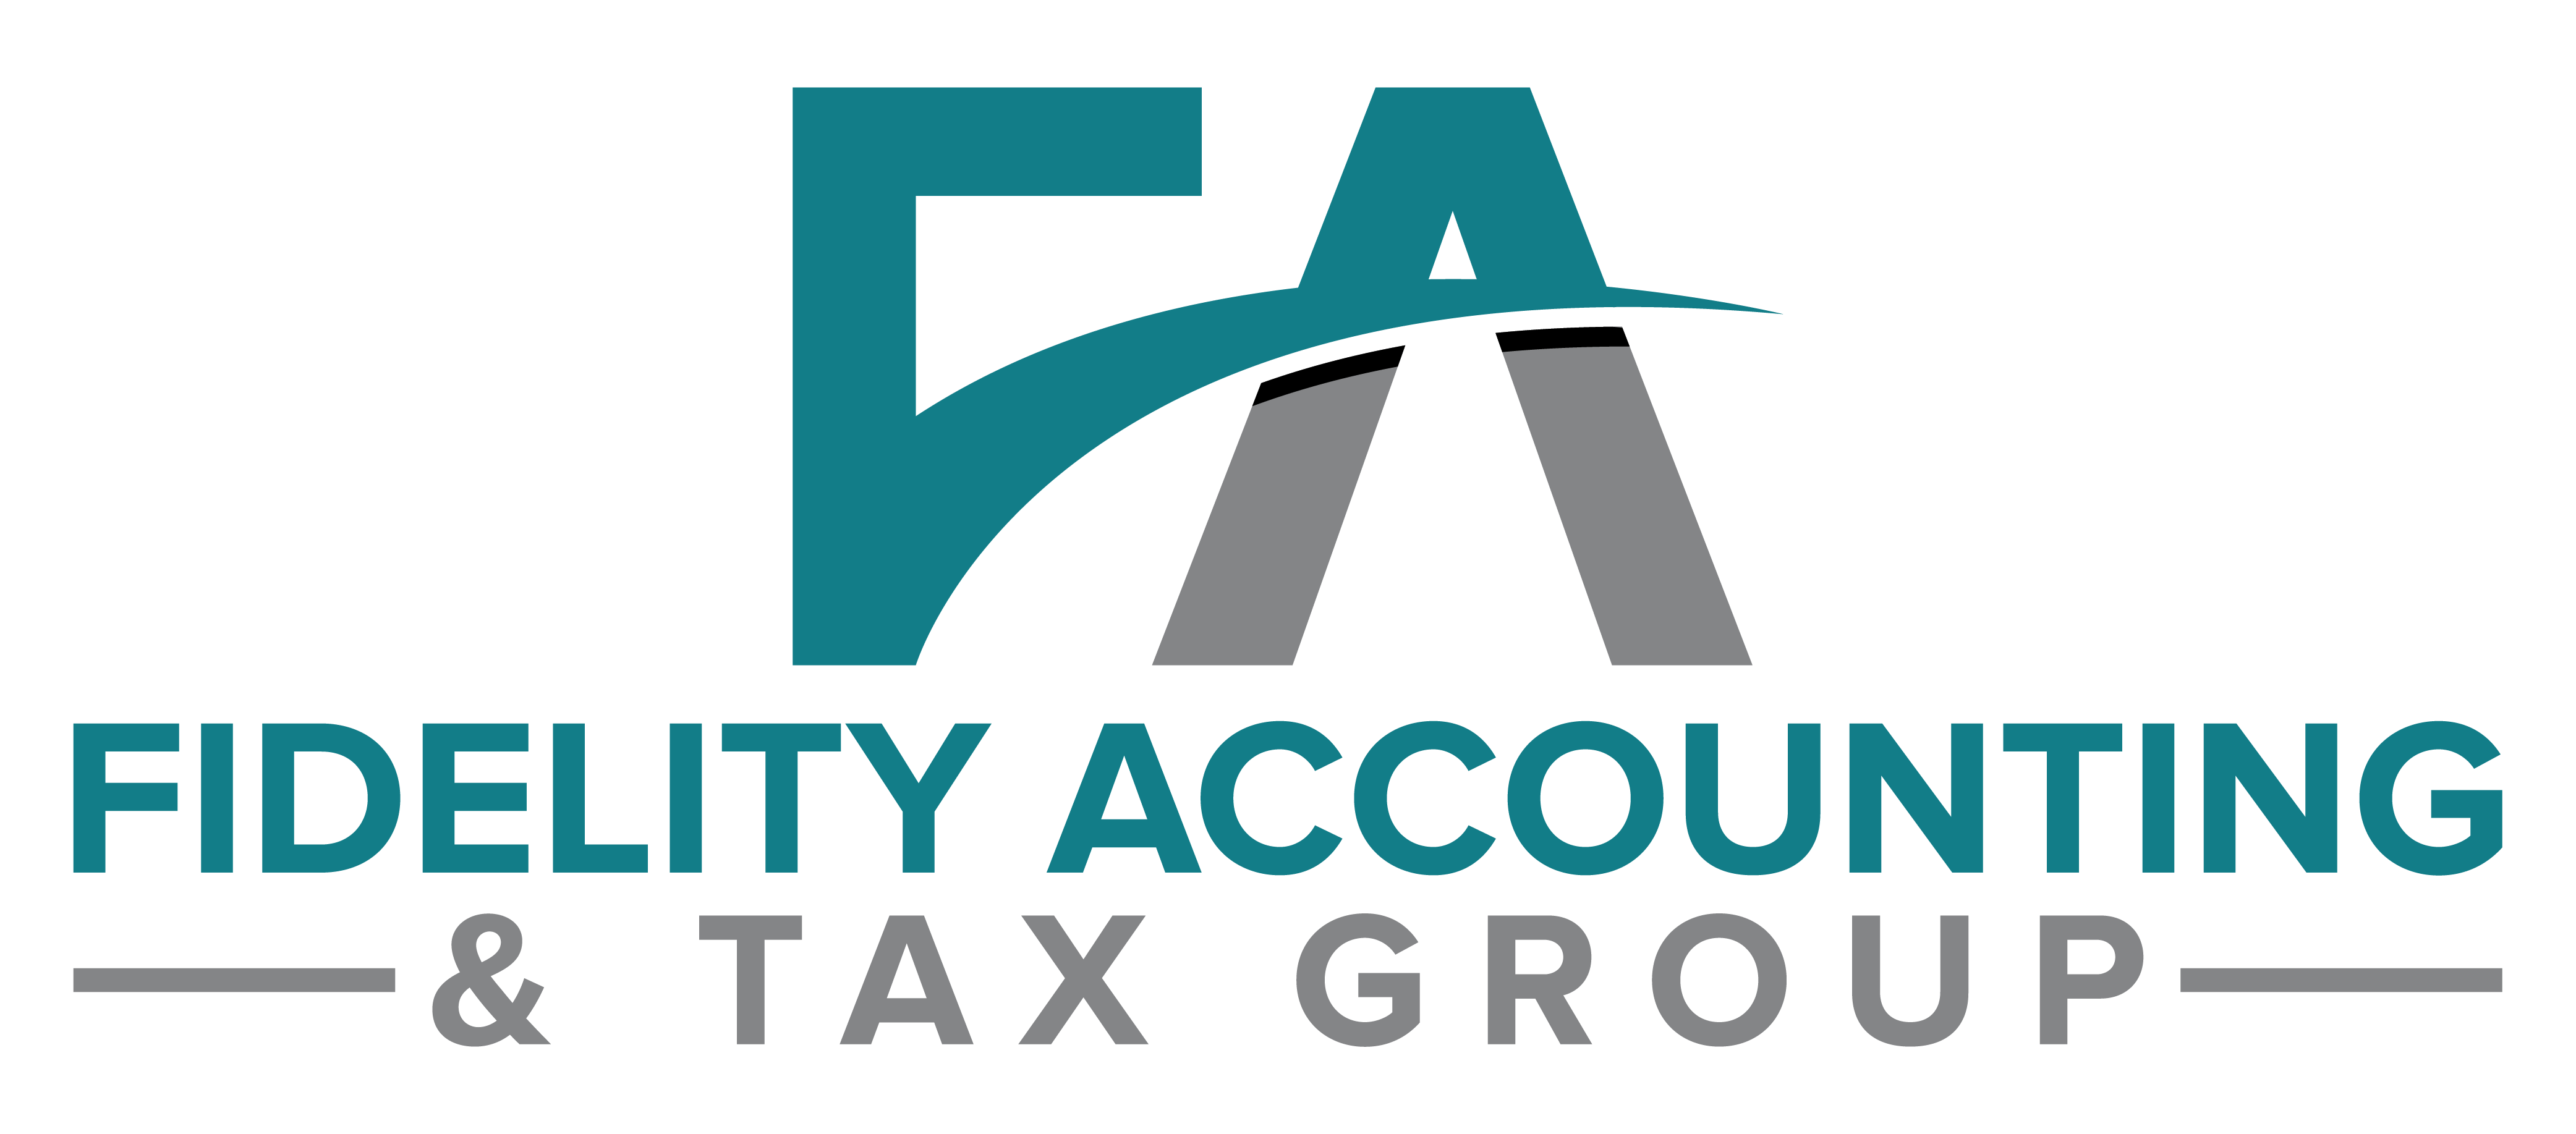 Fidelity Accounting & Tax Group